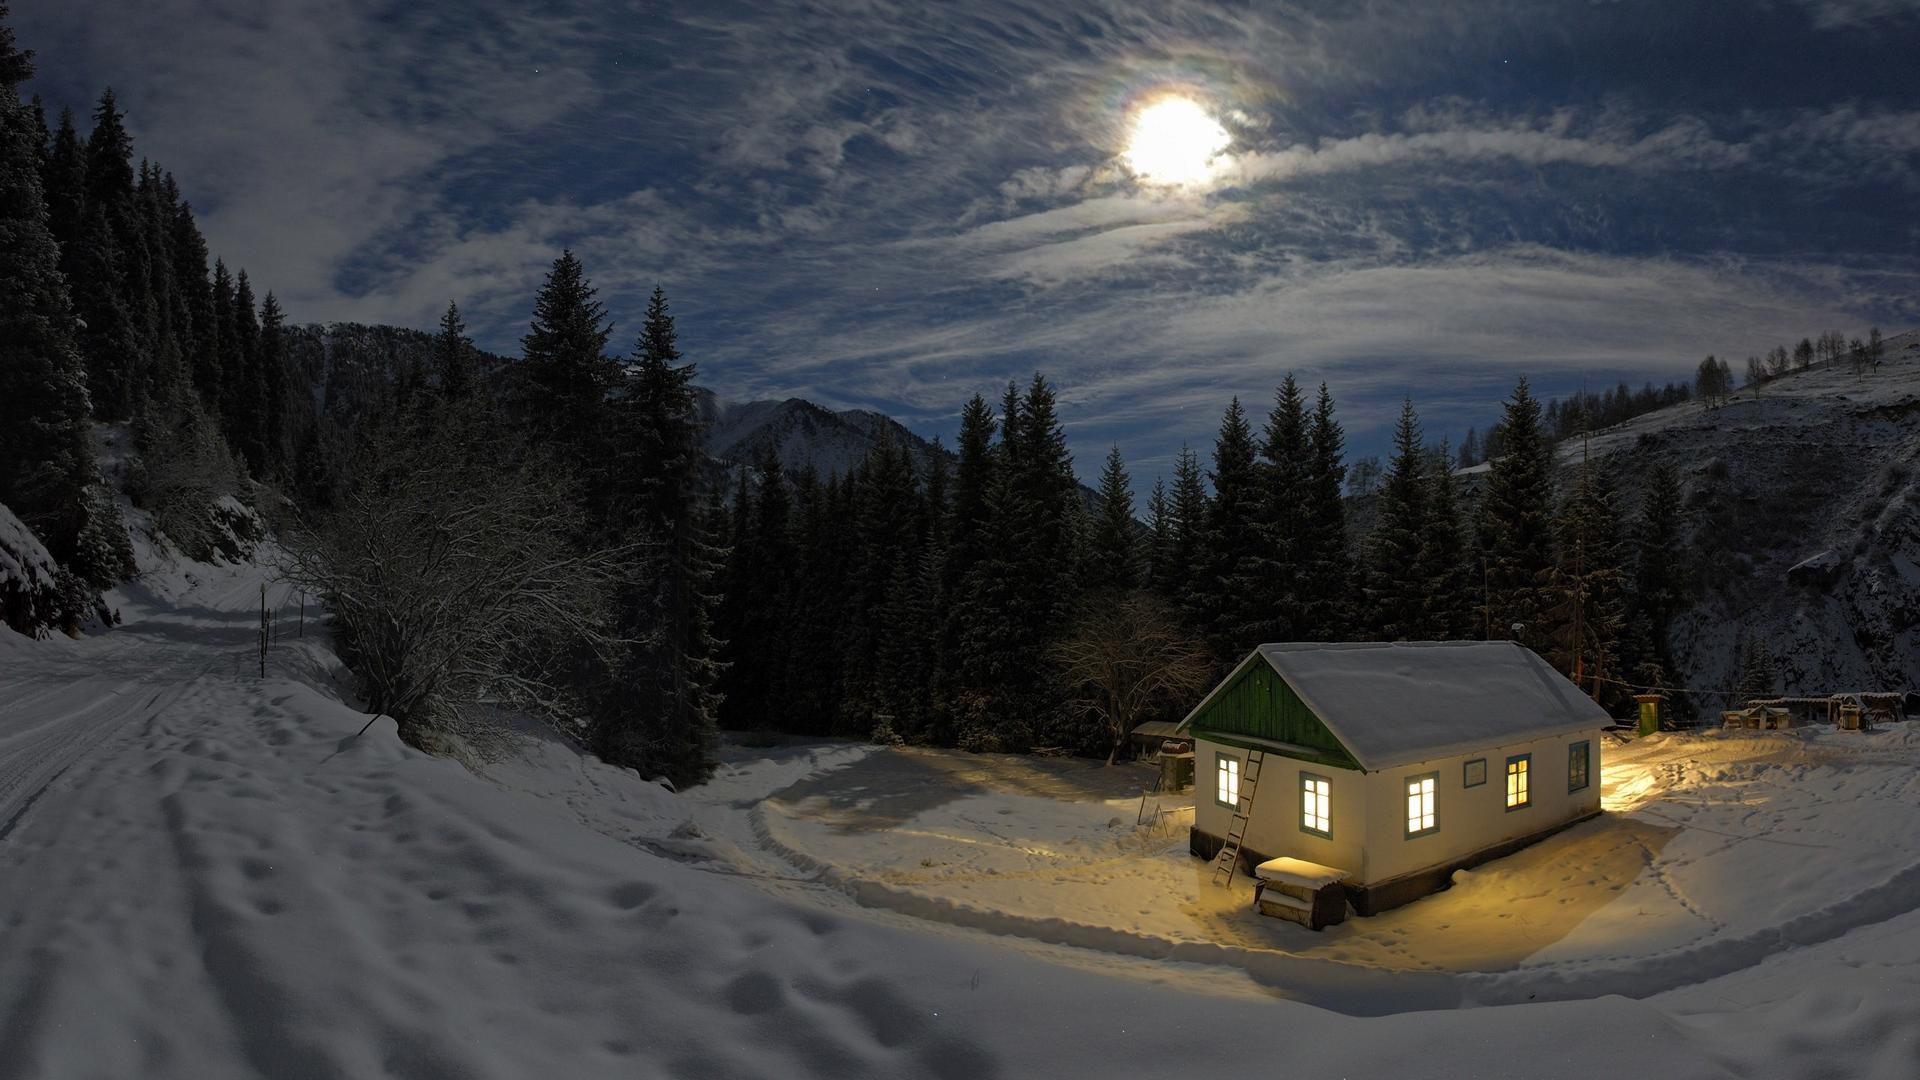 Download wallpaper 1920x1080 lodge, light, moon, privacy, mountains